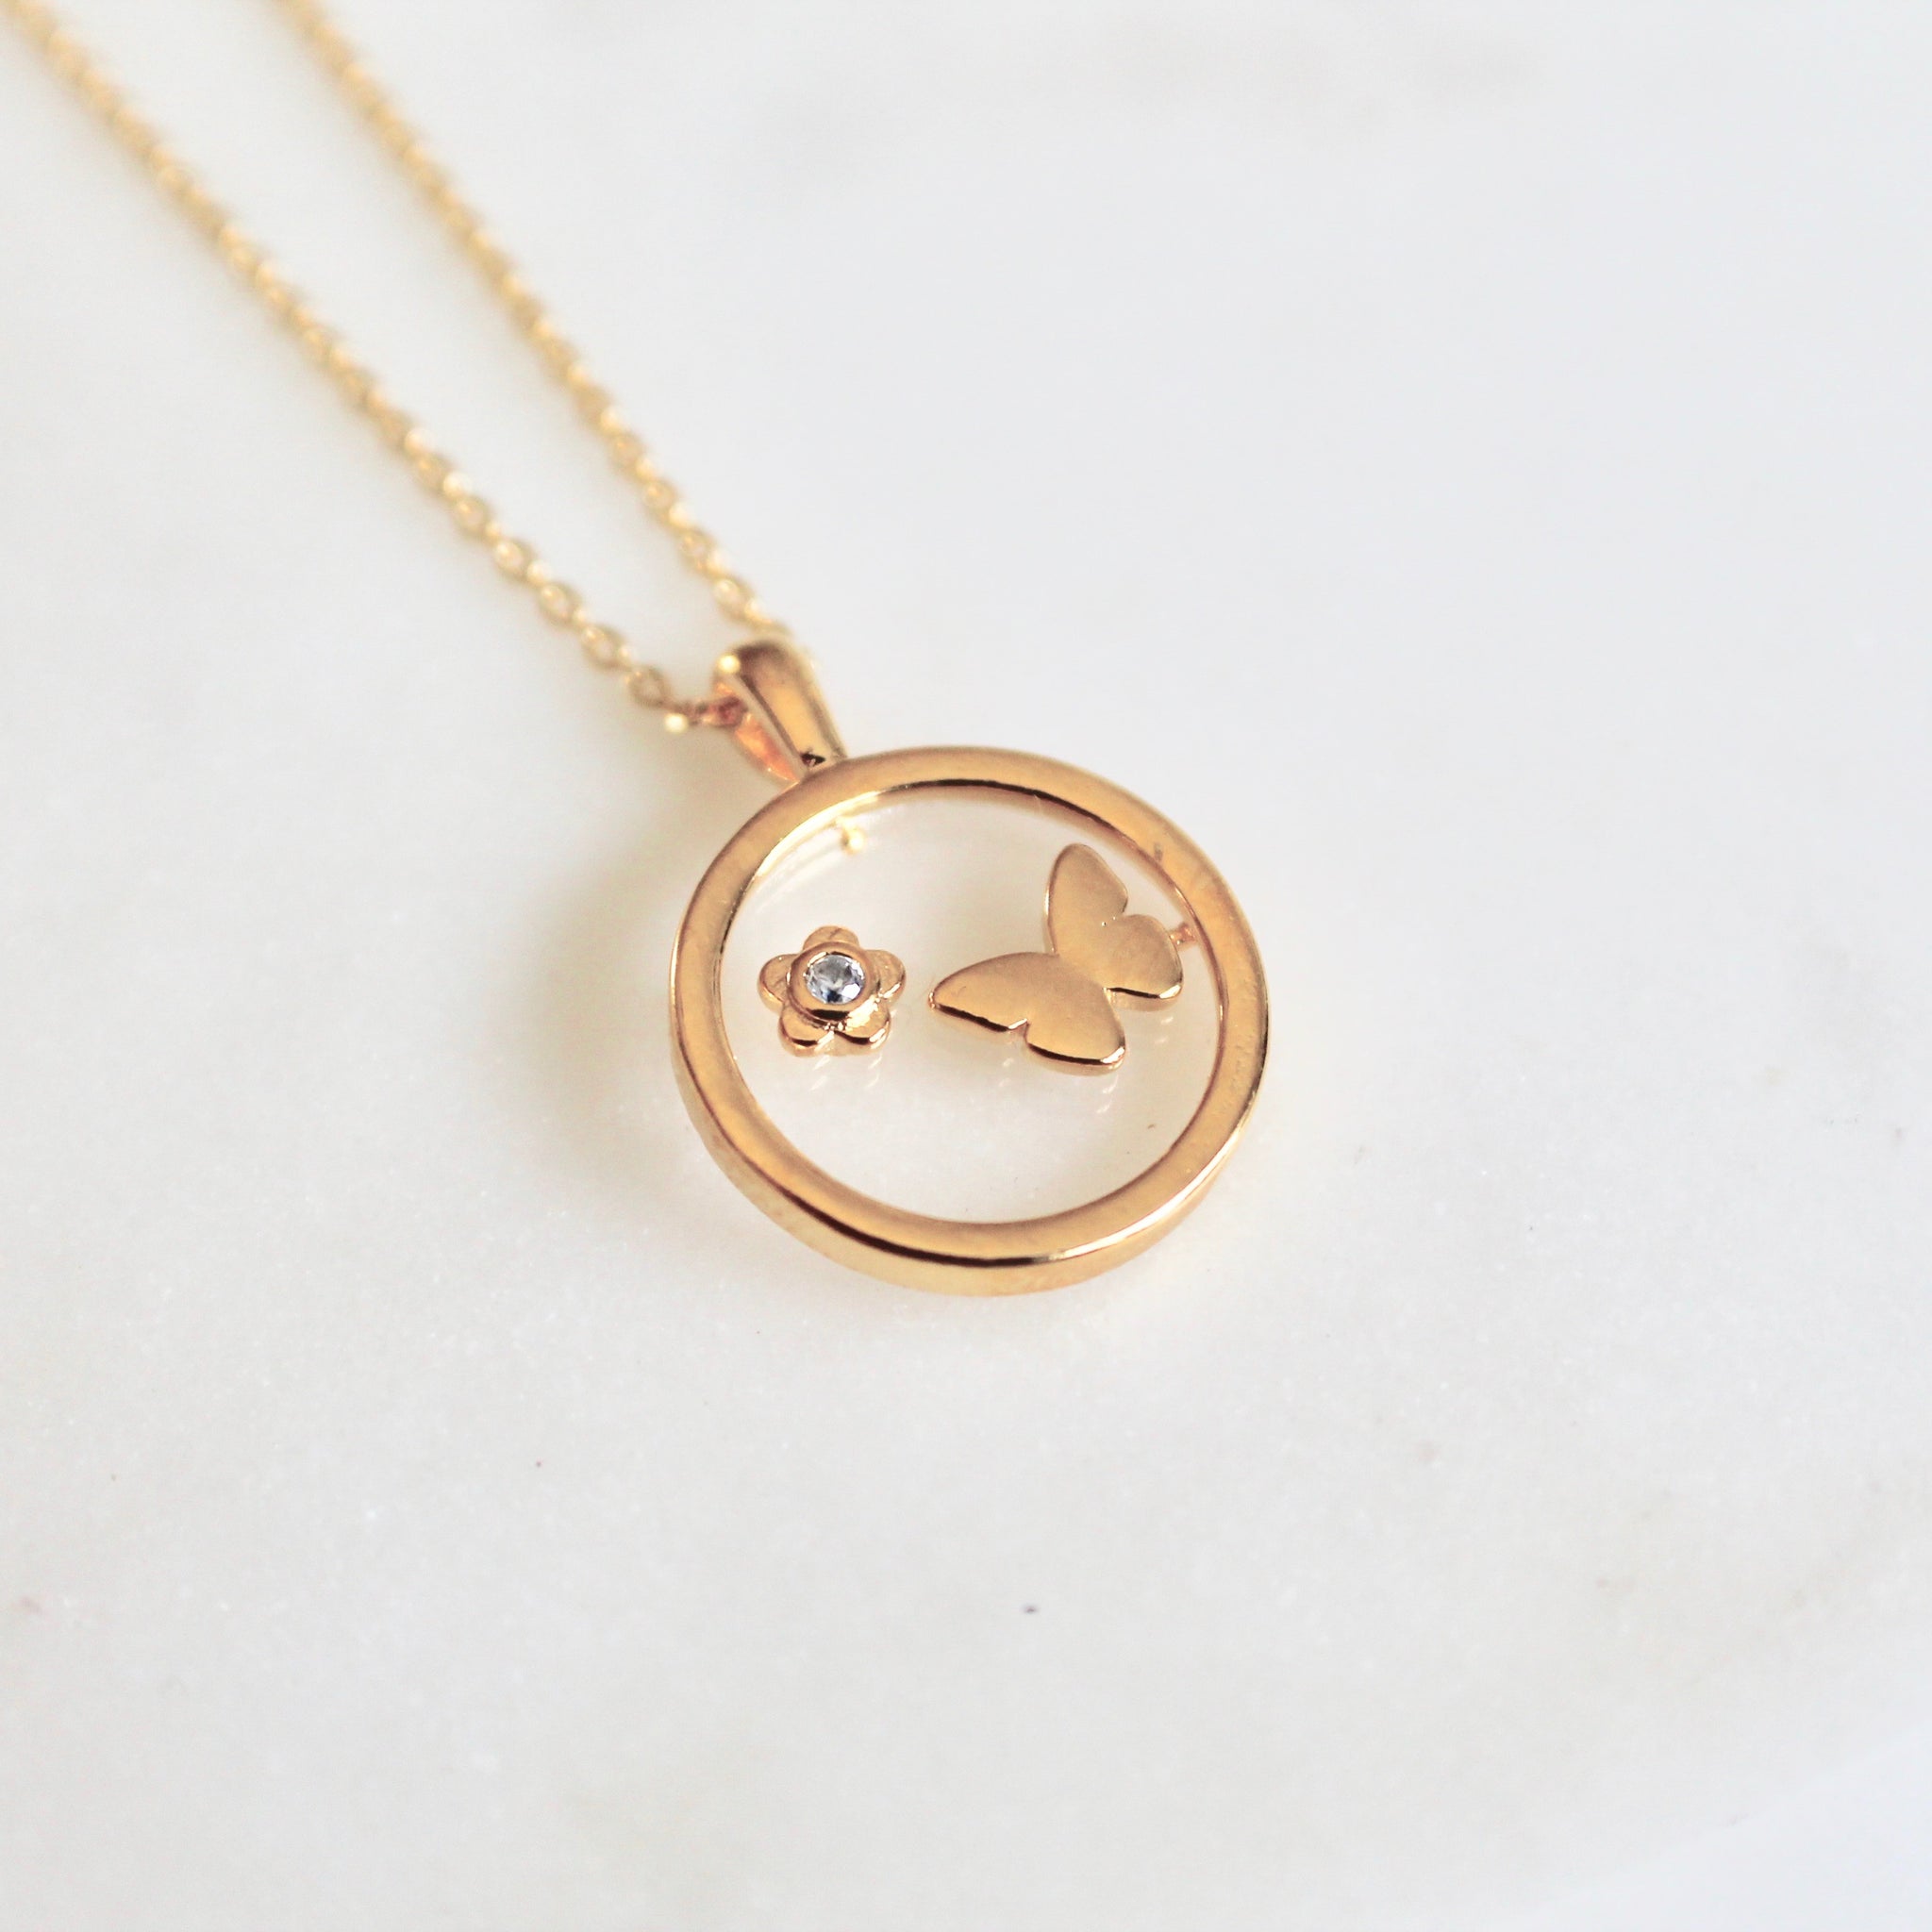 Butterfly medallion dainty necklace